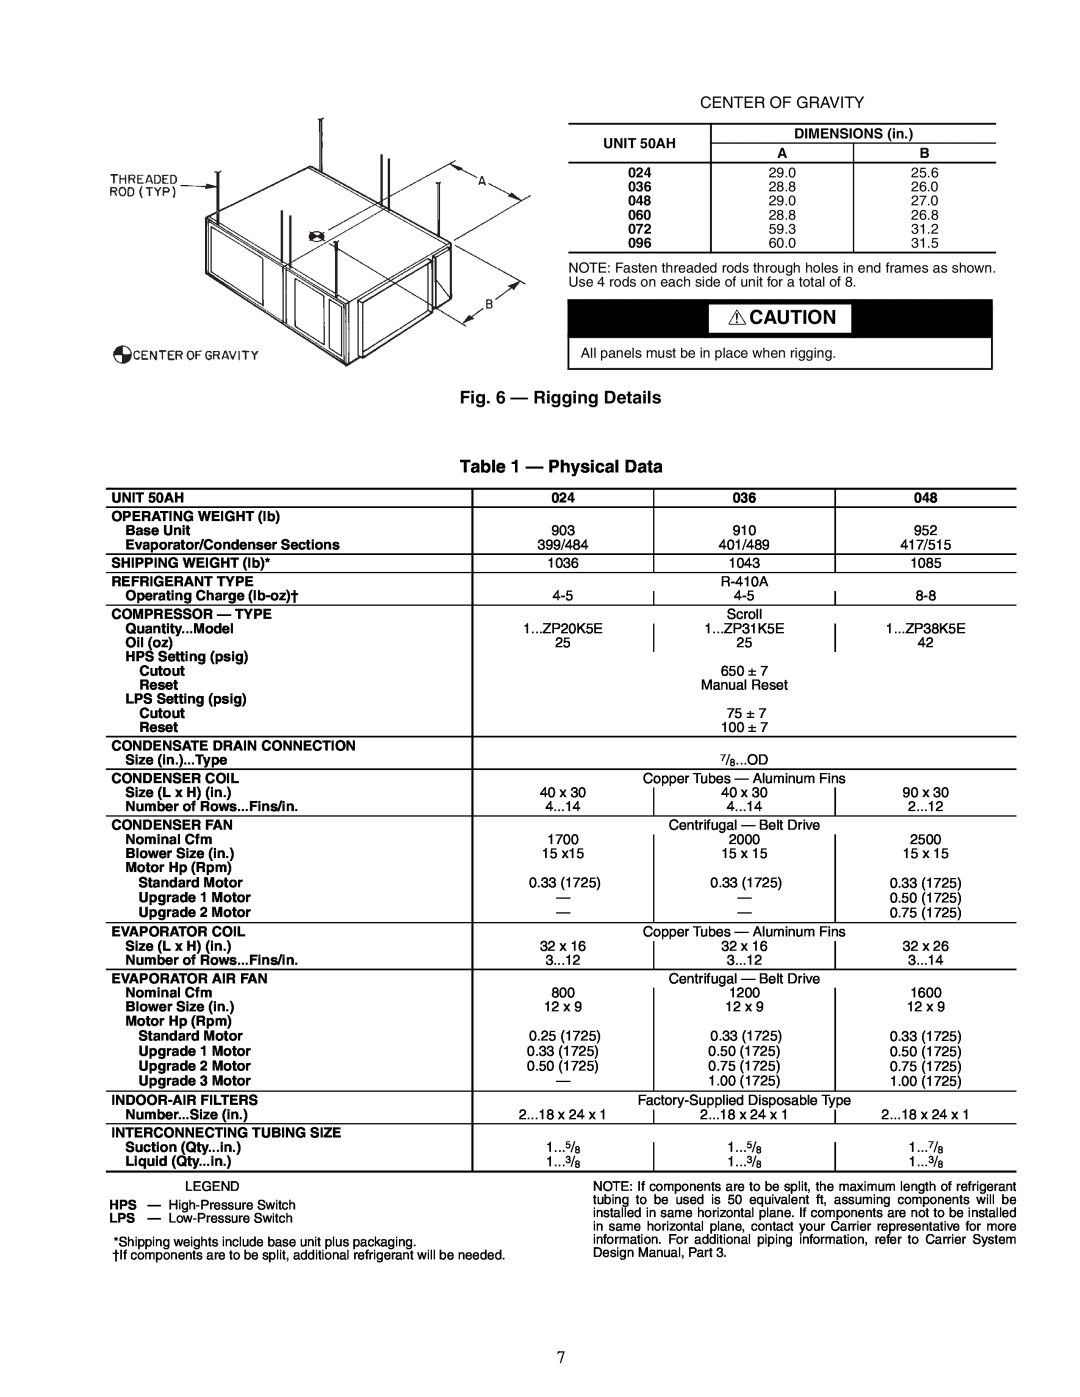 Carrier 50AH024-096 specifications Rigging Details, Physical Data, Center Of Gravity 